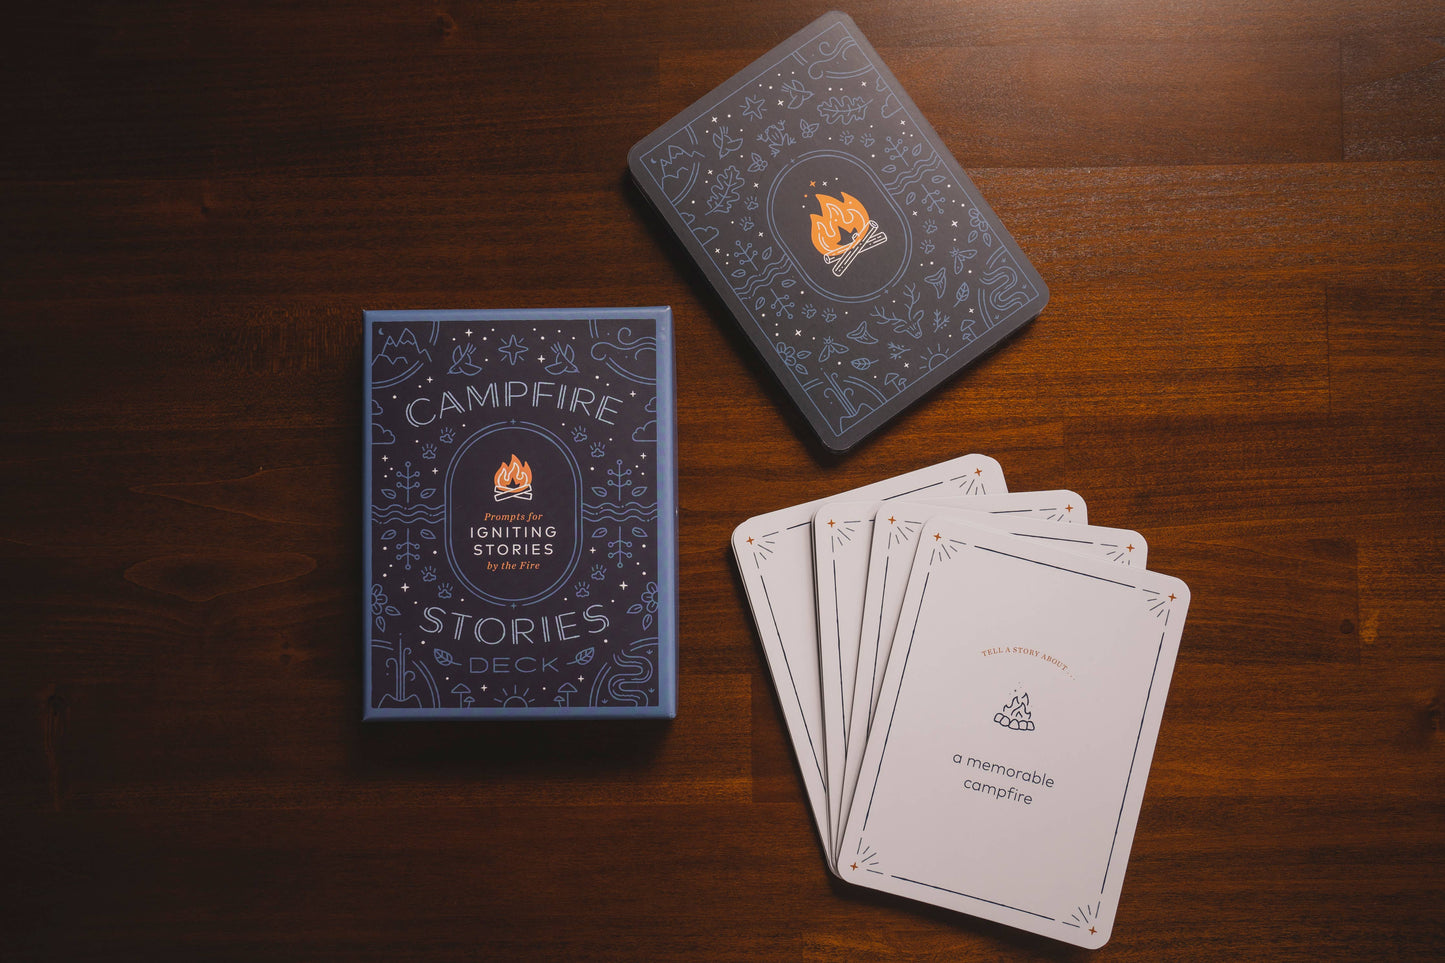 Campfire Stories Deck Prompts for Igniting Stories